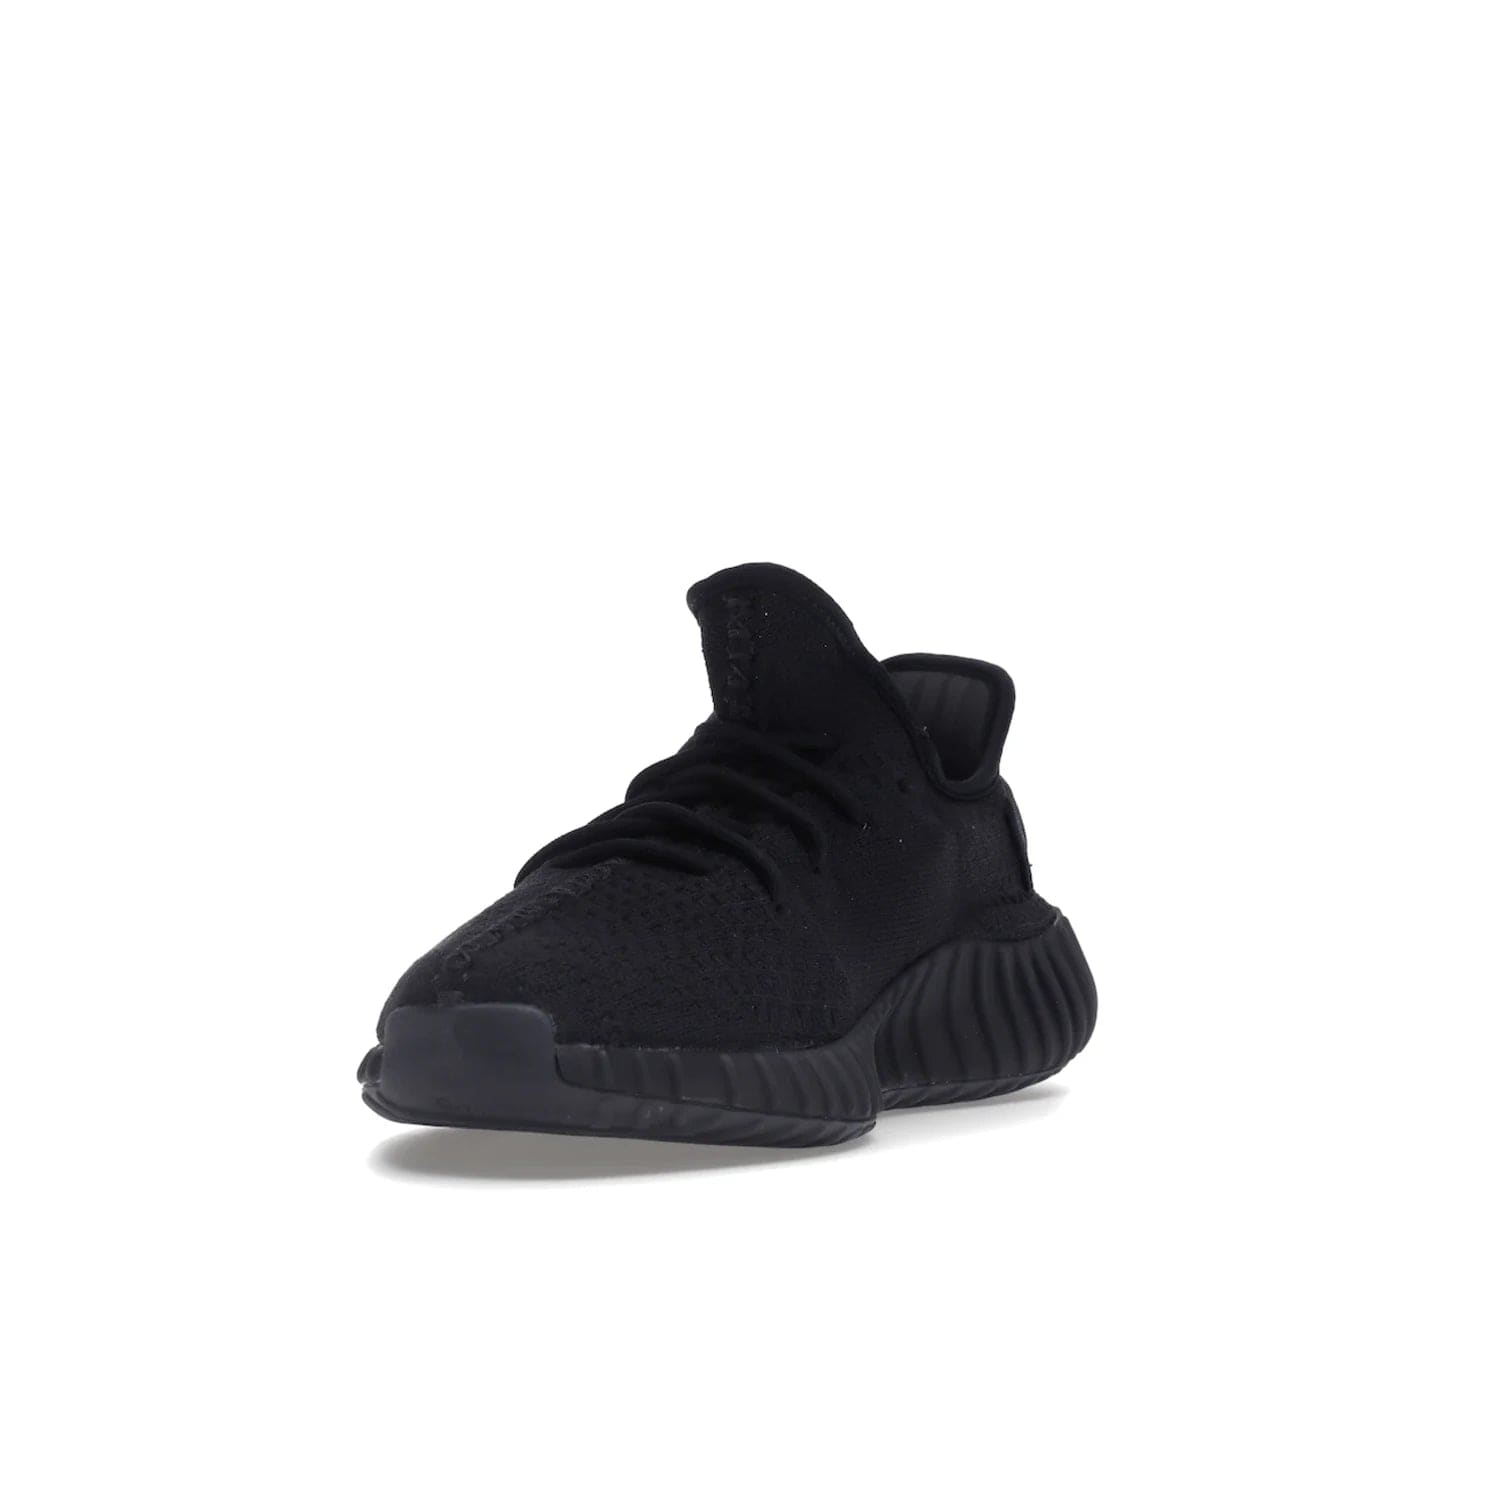 adidas Yeezy Boost 350 V2 Onyx - Image 13 - Only at www.BallersClubKickz.com - Adidas Yeezy Boost 350 V2 Onyx Triple Black shoes for comfort and style. Arriving Spring 2022.